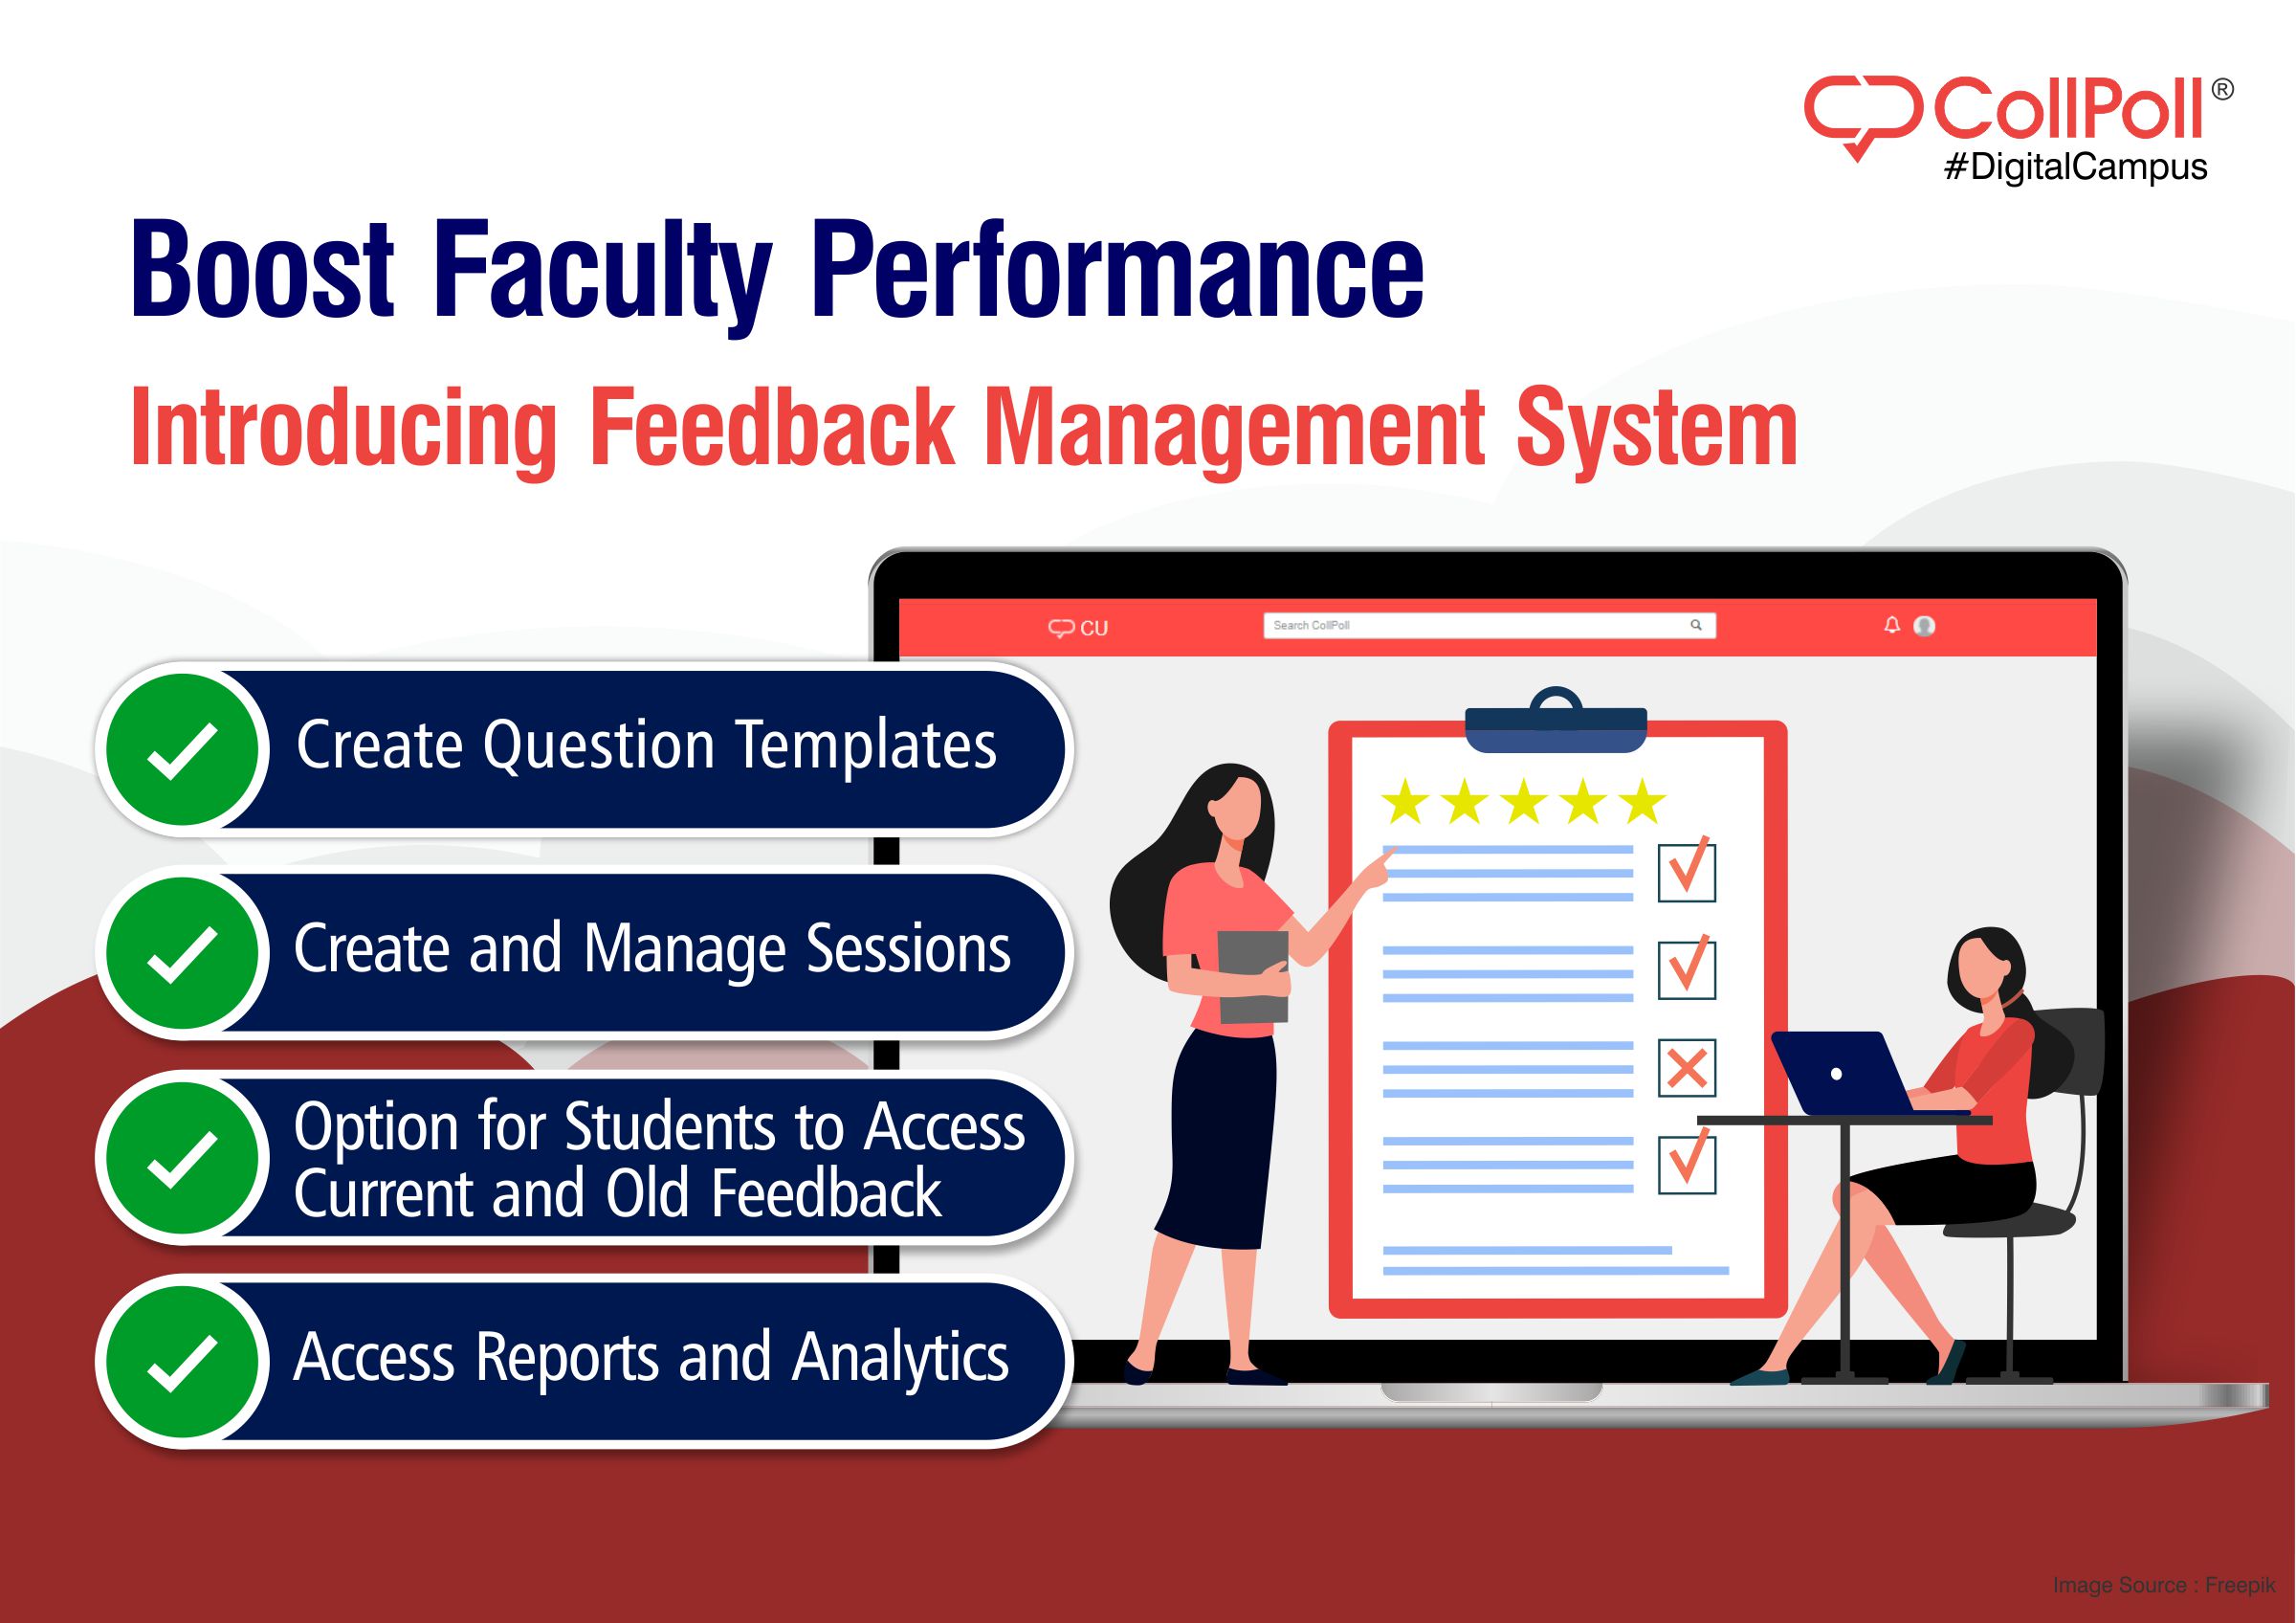 CollPoll’s online feedback management system helps institutions to collect feedback from the students, rate and analyze faculty’s performance, and reduce the strenuous work of physically examining the feedback pages of each and every student.